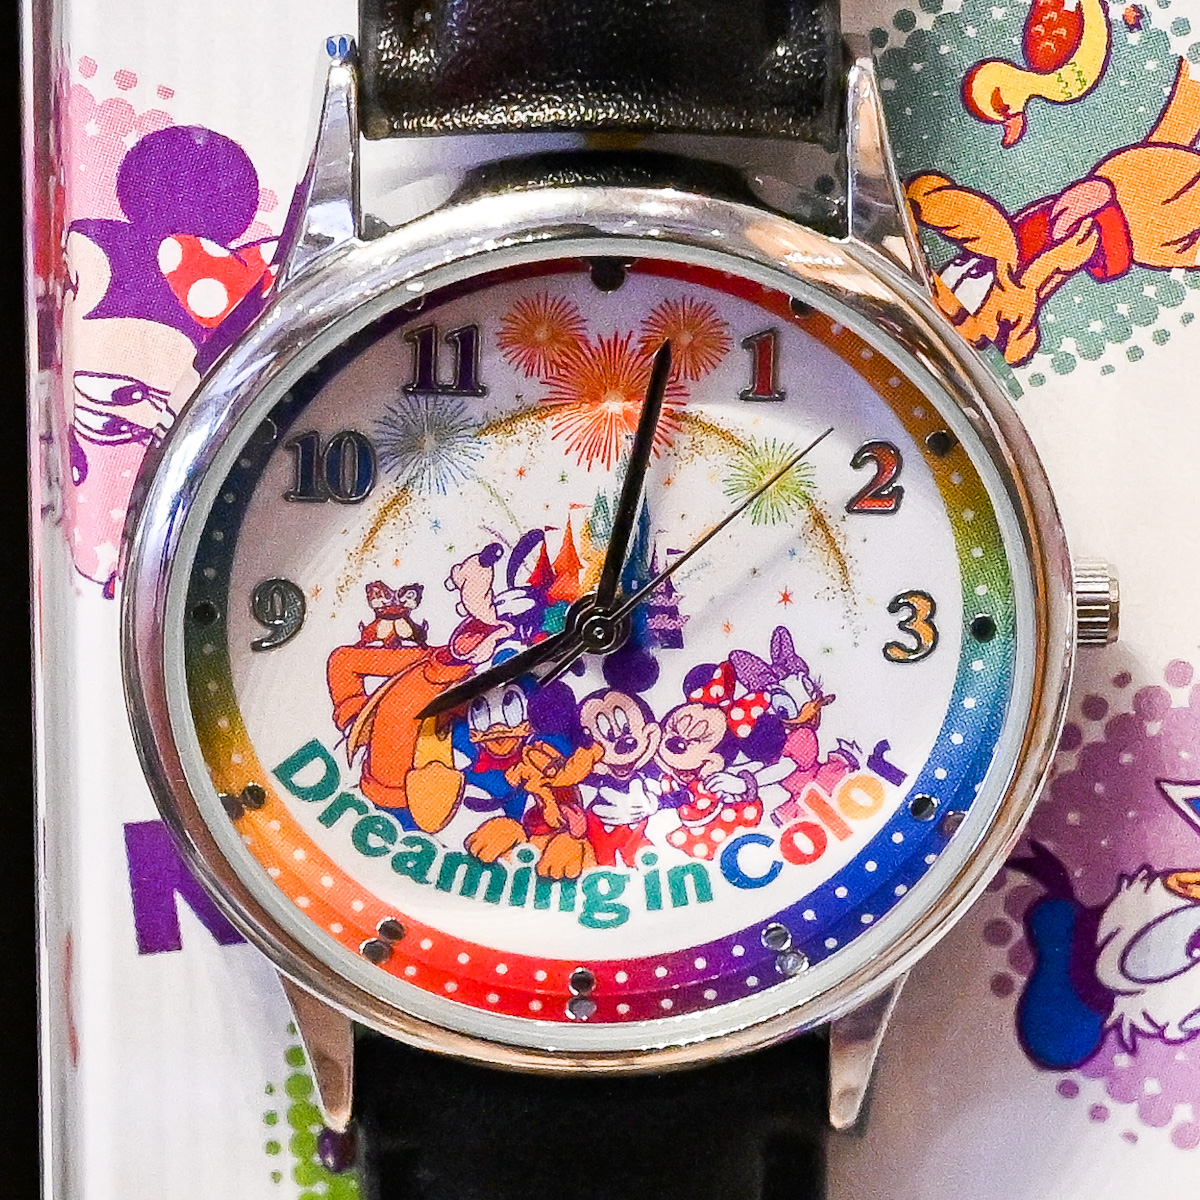 Dreaming in Color”！東京ディズニーランド「ミッキー&フレンズ 